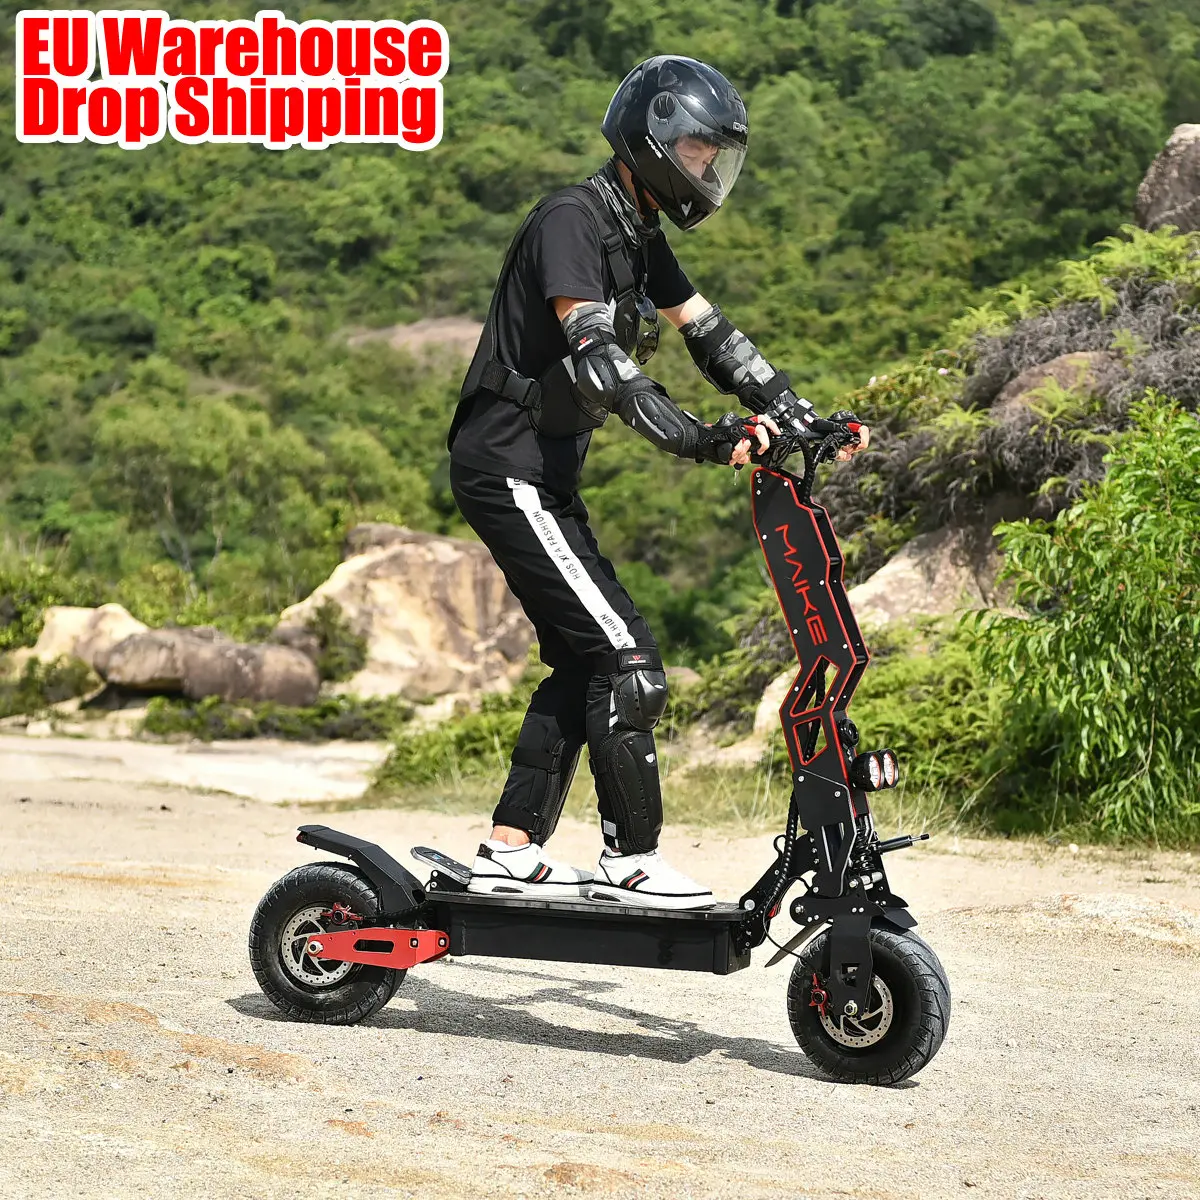 

Free Shipping Maike MKS 8000w electric motorcycle fast dual scooter eu warehouse 13 inch wide wheel off road scooter electric